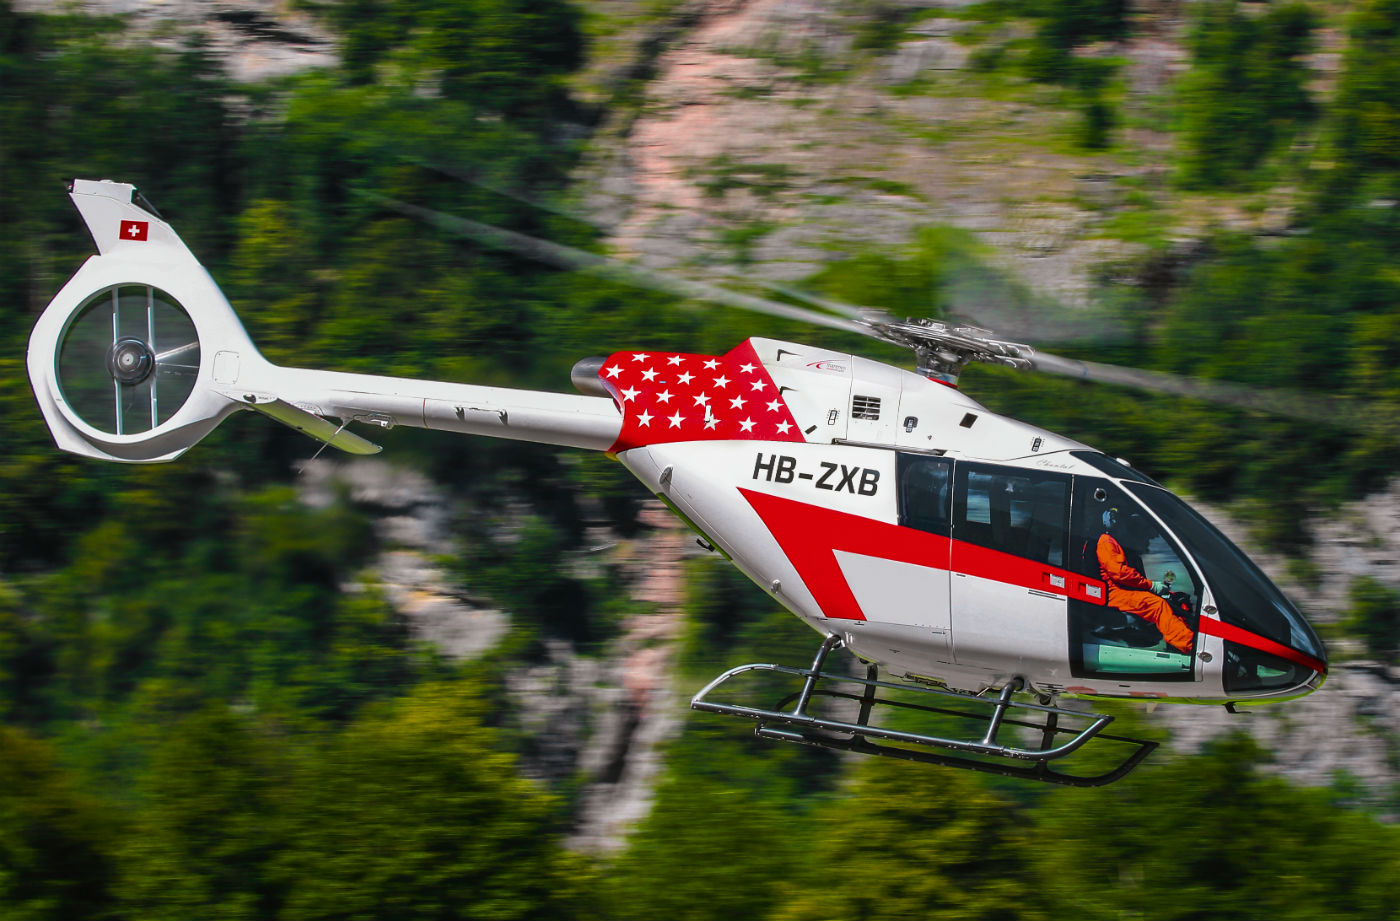 Members of the MSH team will be available to discuss the outstanding capabilities of the single turbine SKYe SH09 helicopter, progress on the program and flight testing. Eugen Burgler Photo